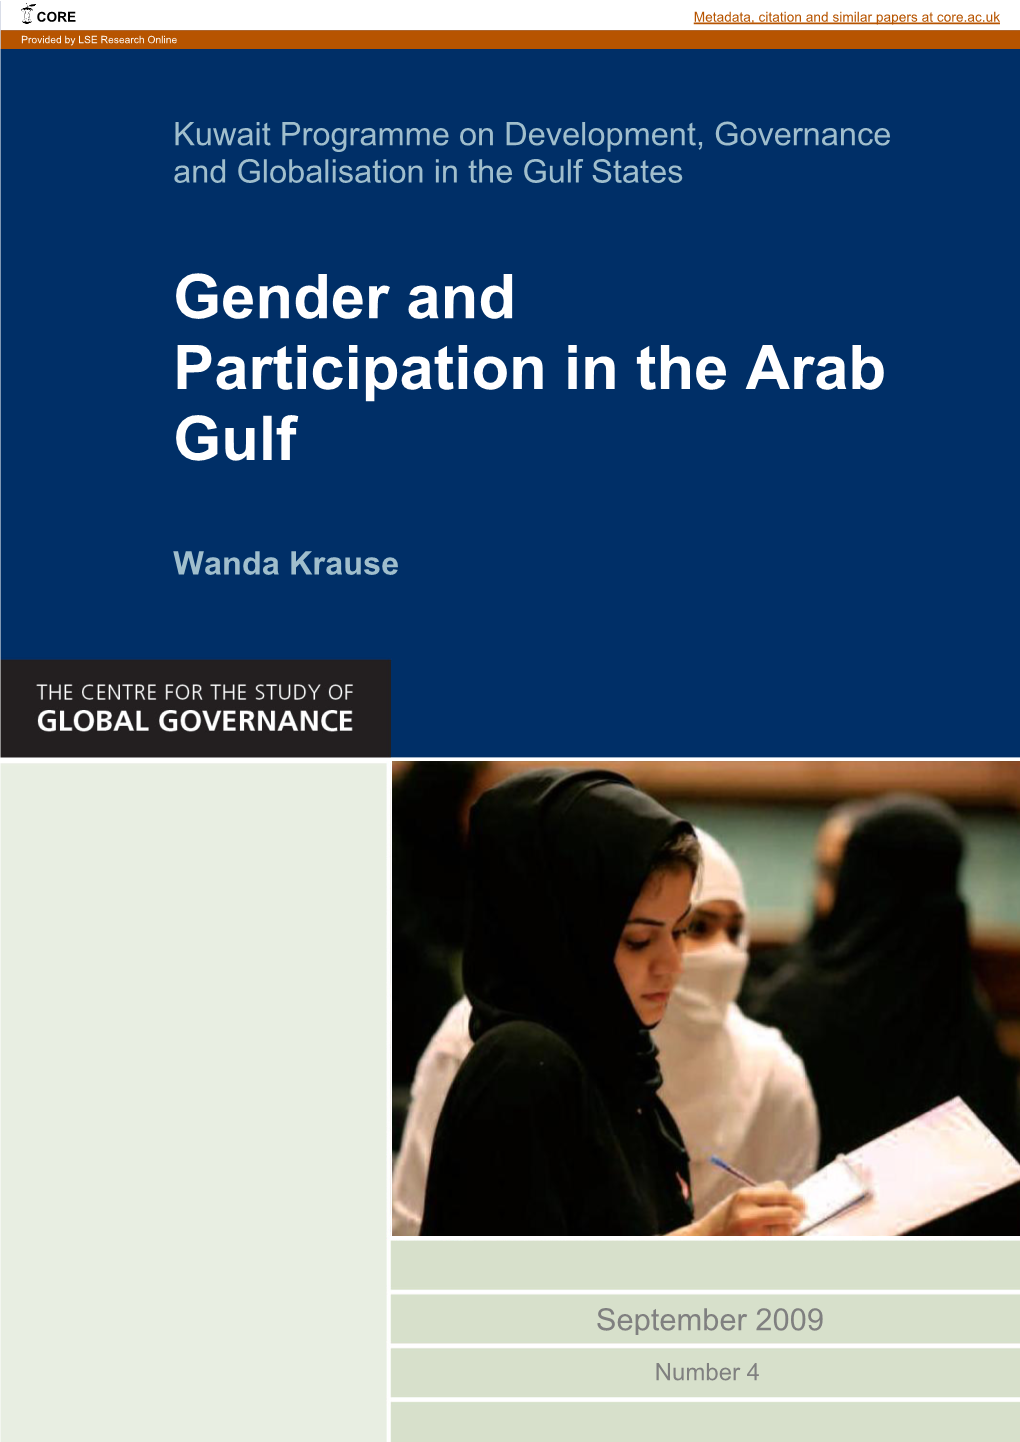 Gender and Participation in the Arab Gulf